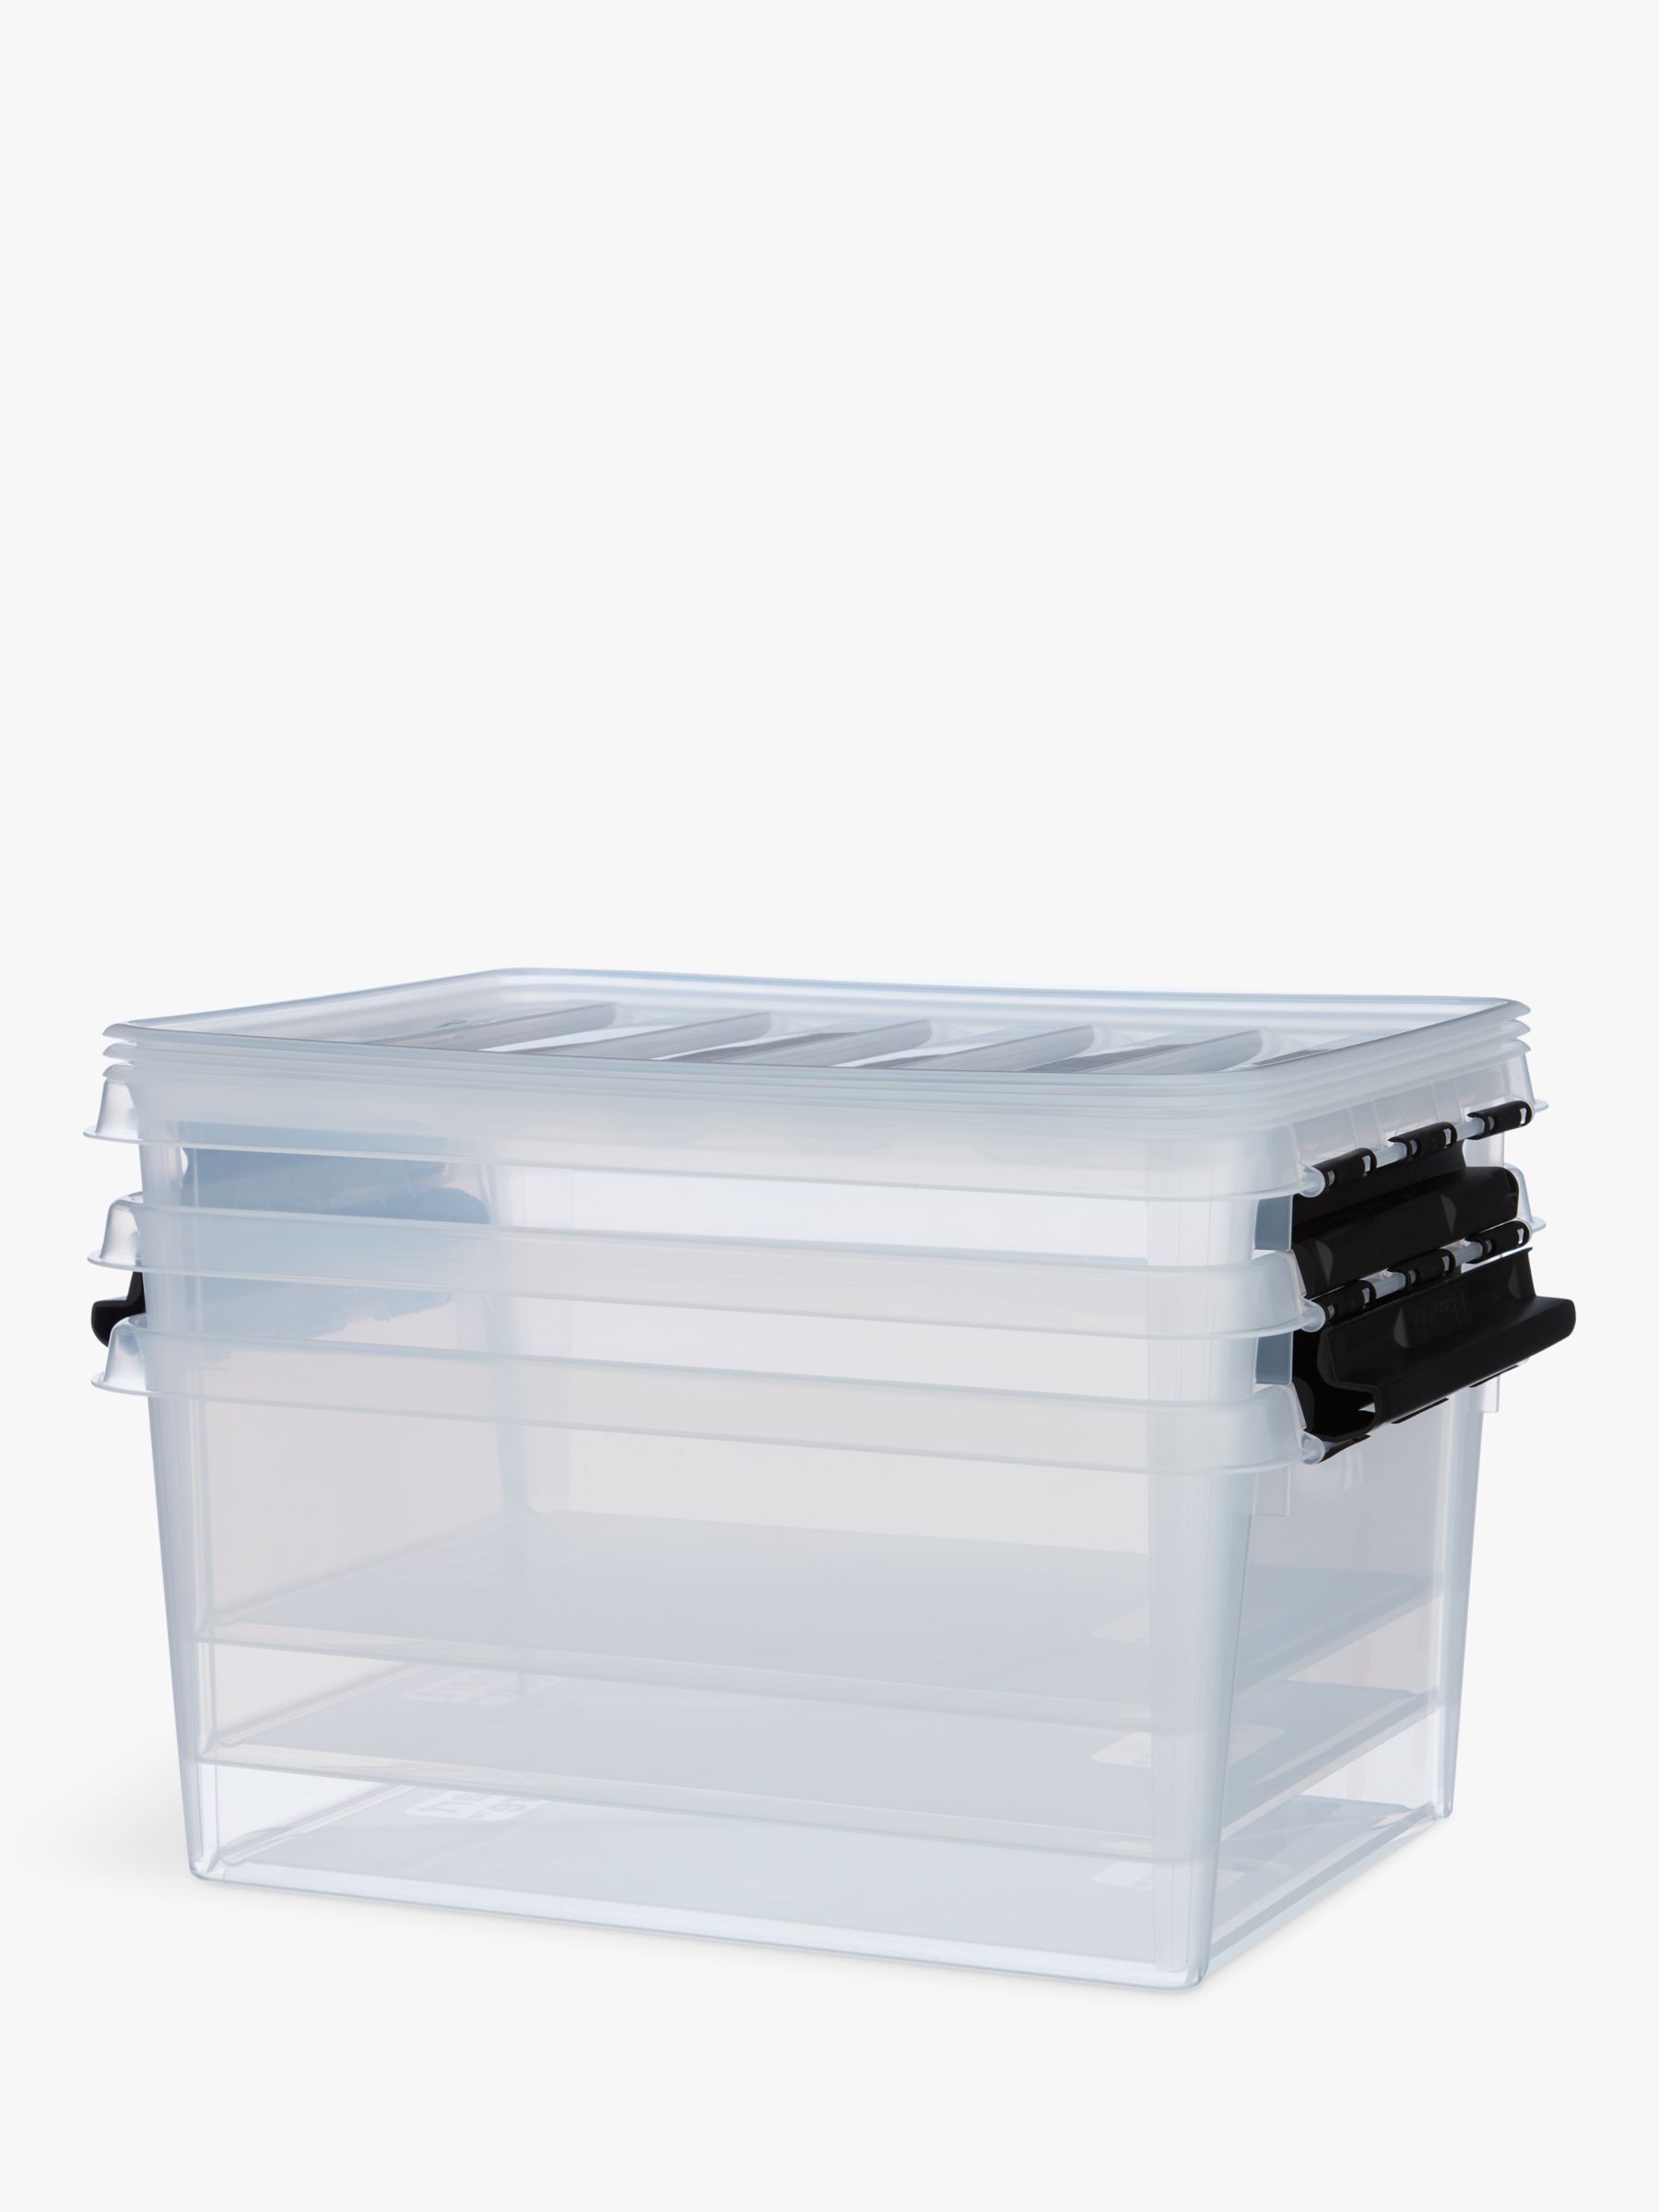 SmartStore by Orthex 15 Plastic Storage Box, Clear, 14L, Pack of 3